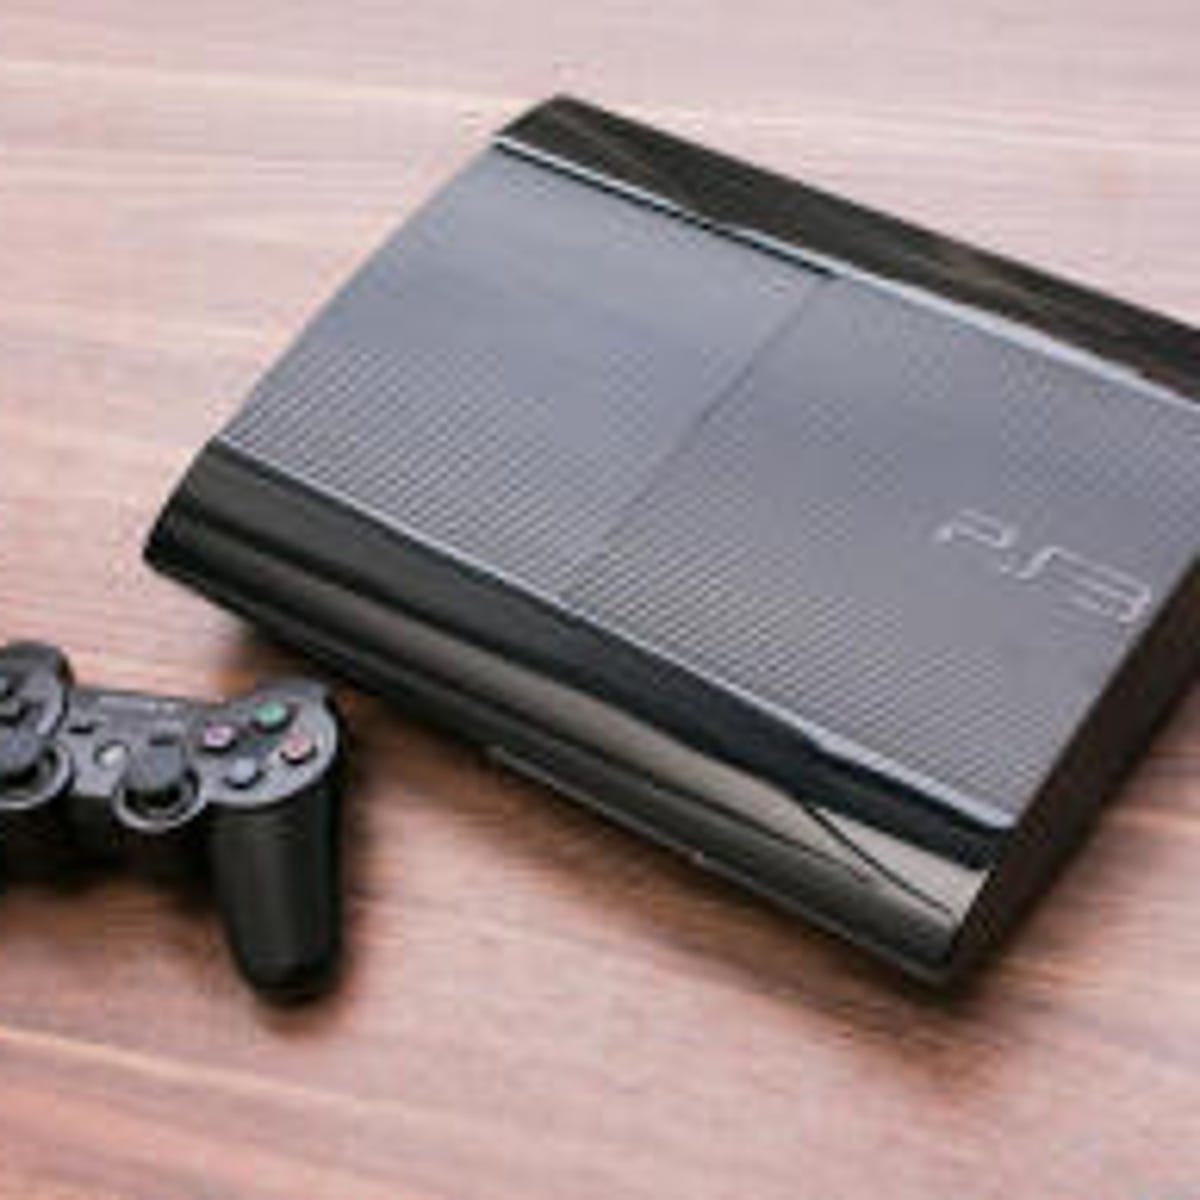 PlayStation 3 Super Slim (500GB) review: Sony's old console is still a contender - CNET